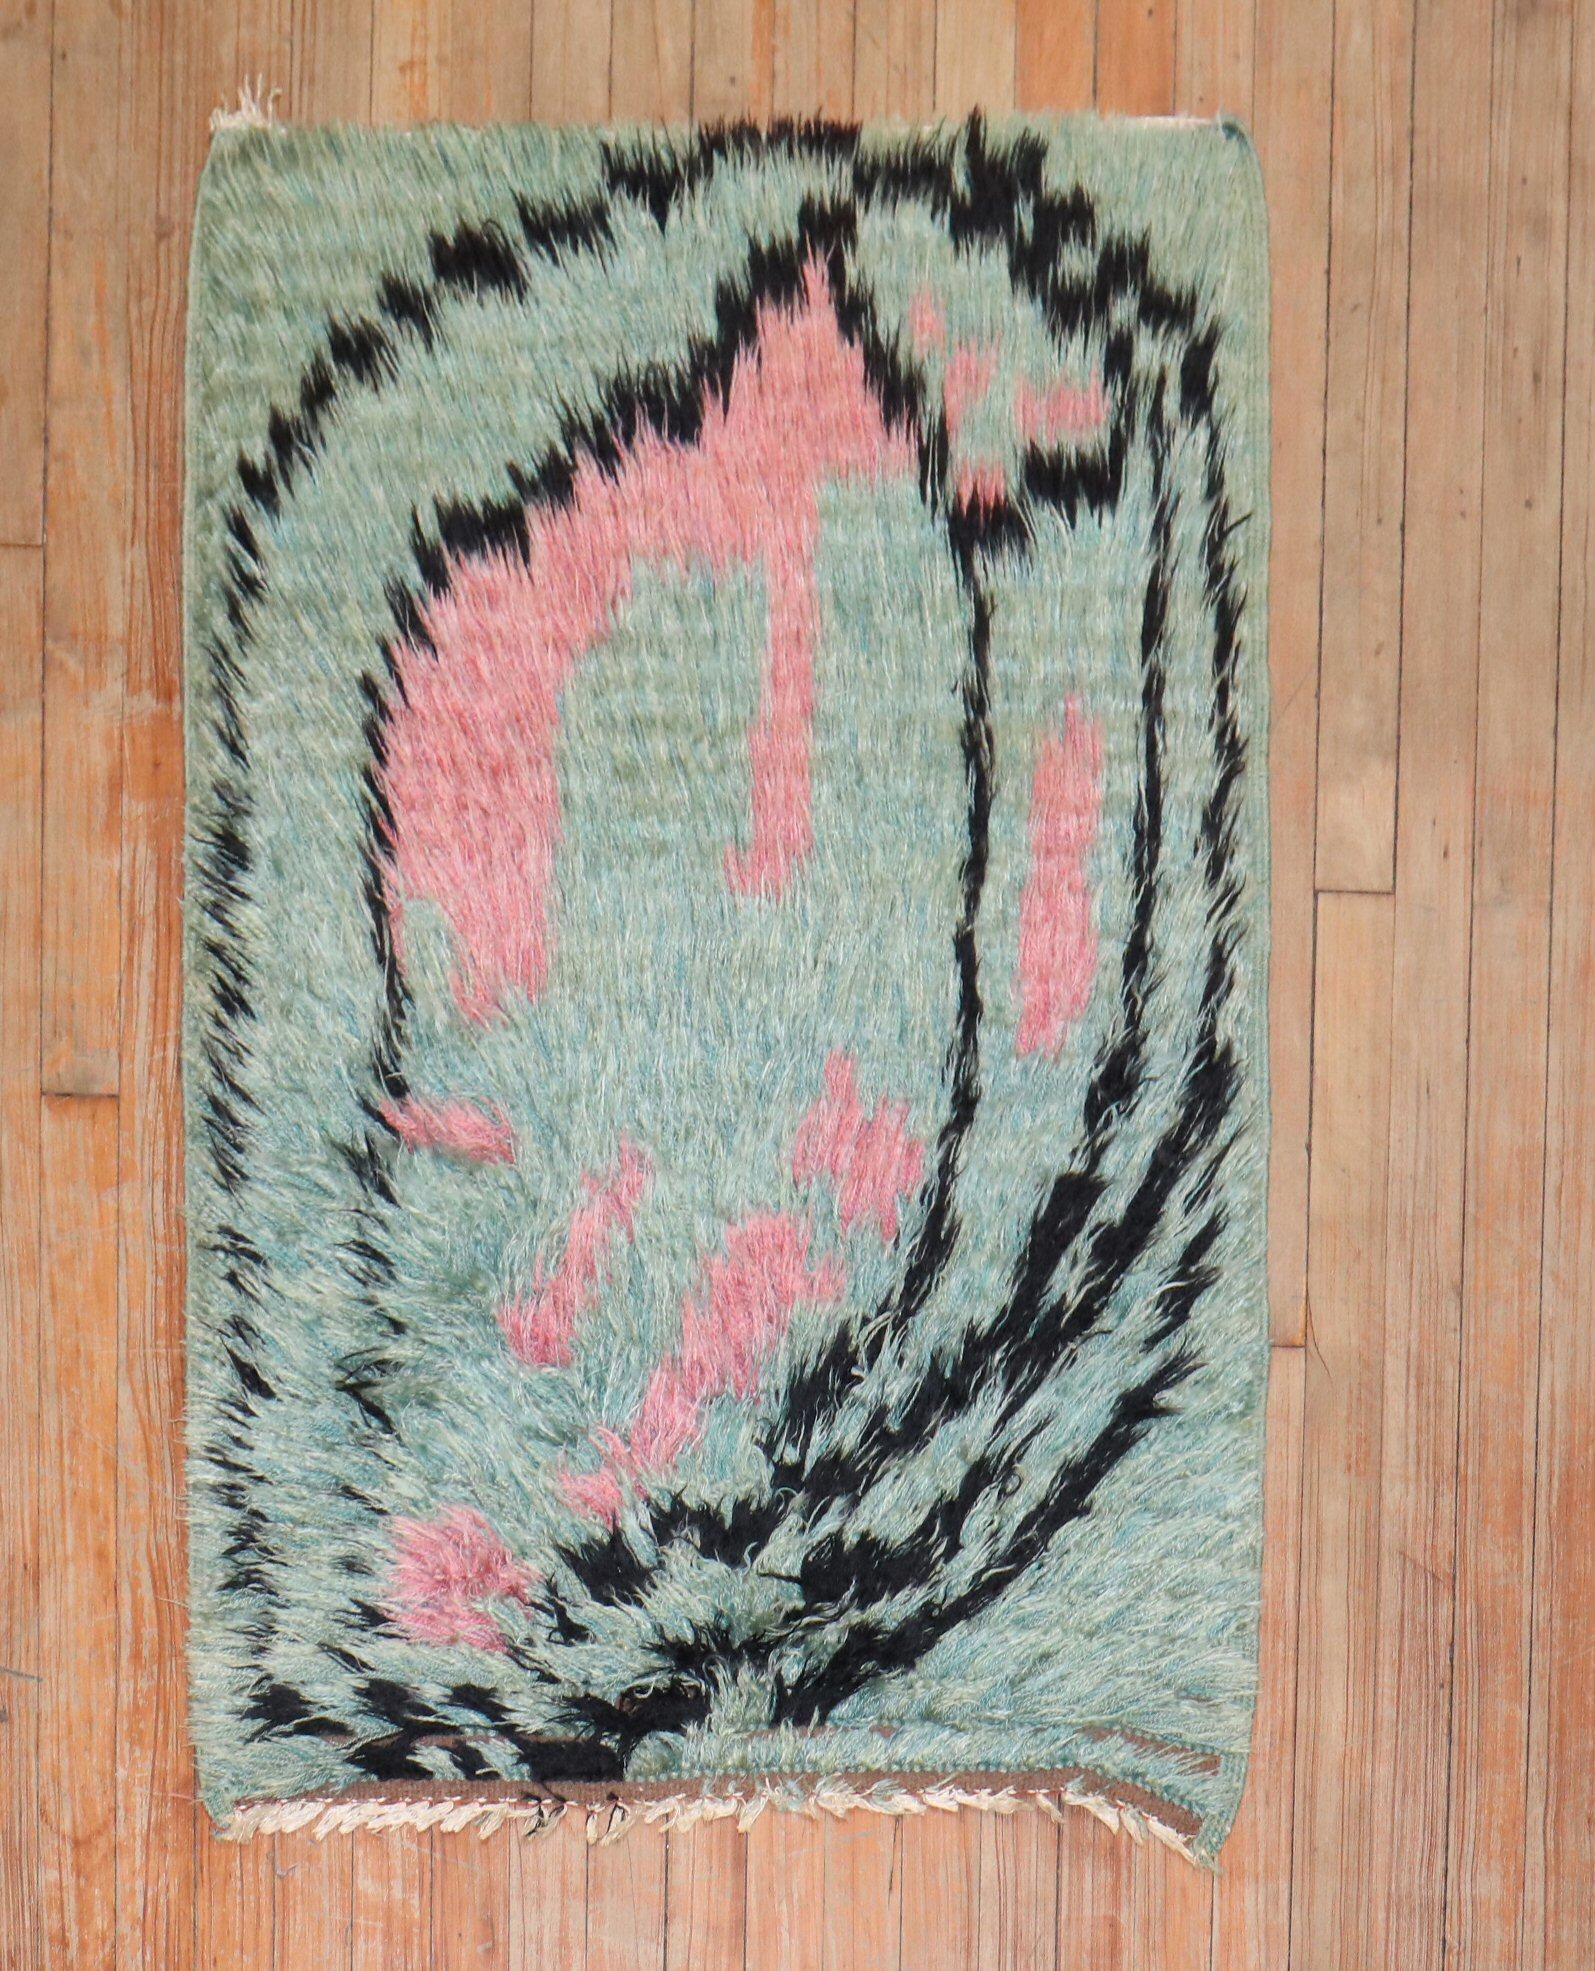 Marvelous small plush Swedish Rya rug from the Mid-20th Century

Measures: 2'7” x 3'8”

Swedish Rya rugs are extremely colorful, lovely and quite chic and each have their own character to them. They tend to have thicker shaggy piles which were